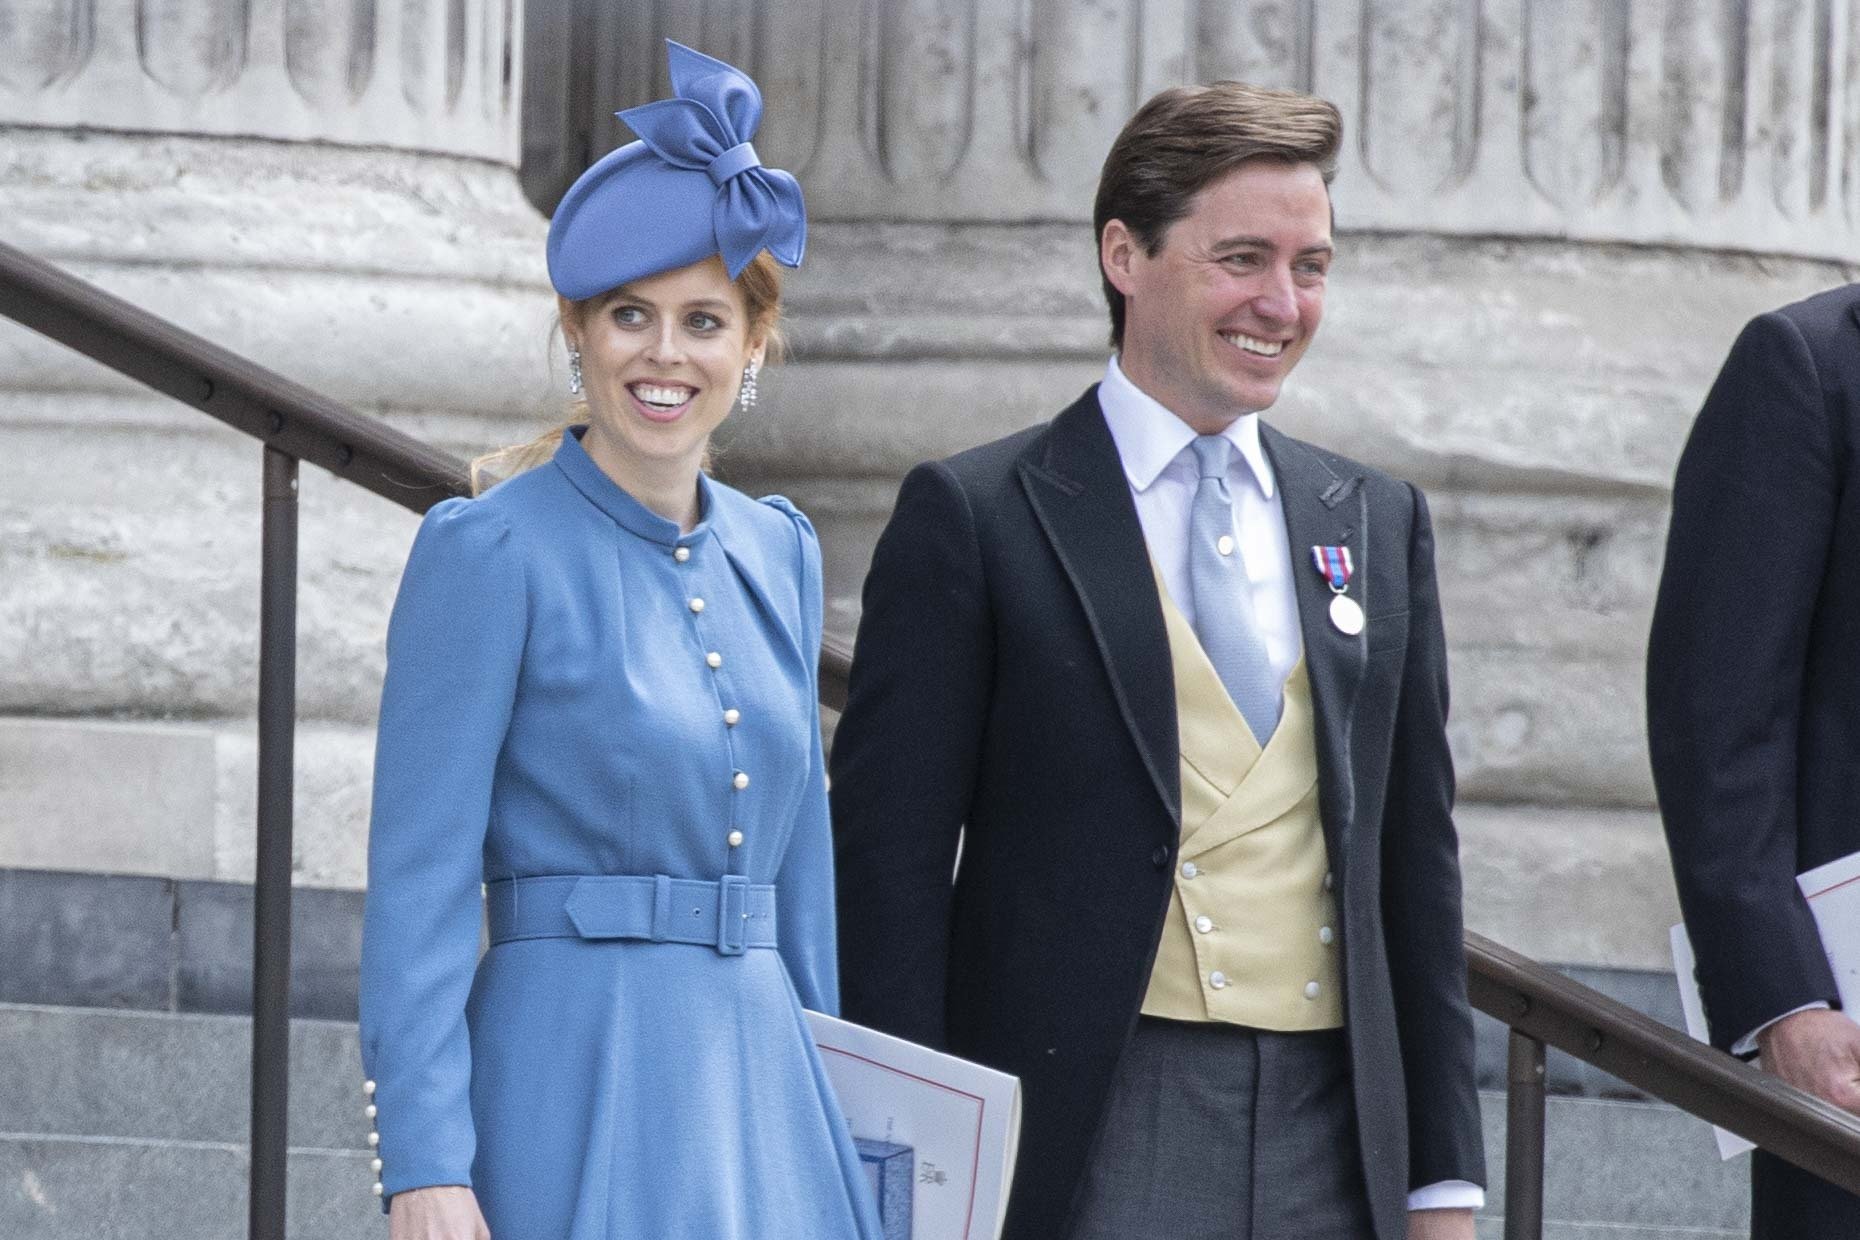 Princess Beatrice and Edoardo Mapelli Mozzi attend the National Service of Thanksgiving at St Paul's Cathedral on June 03, 2022 in London, England. | Source: Getty Images